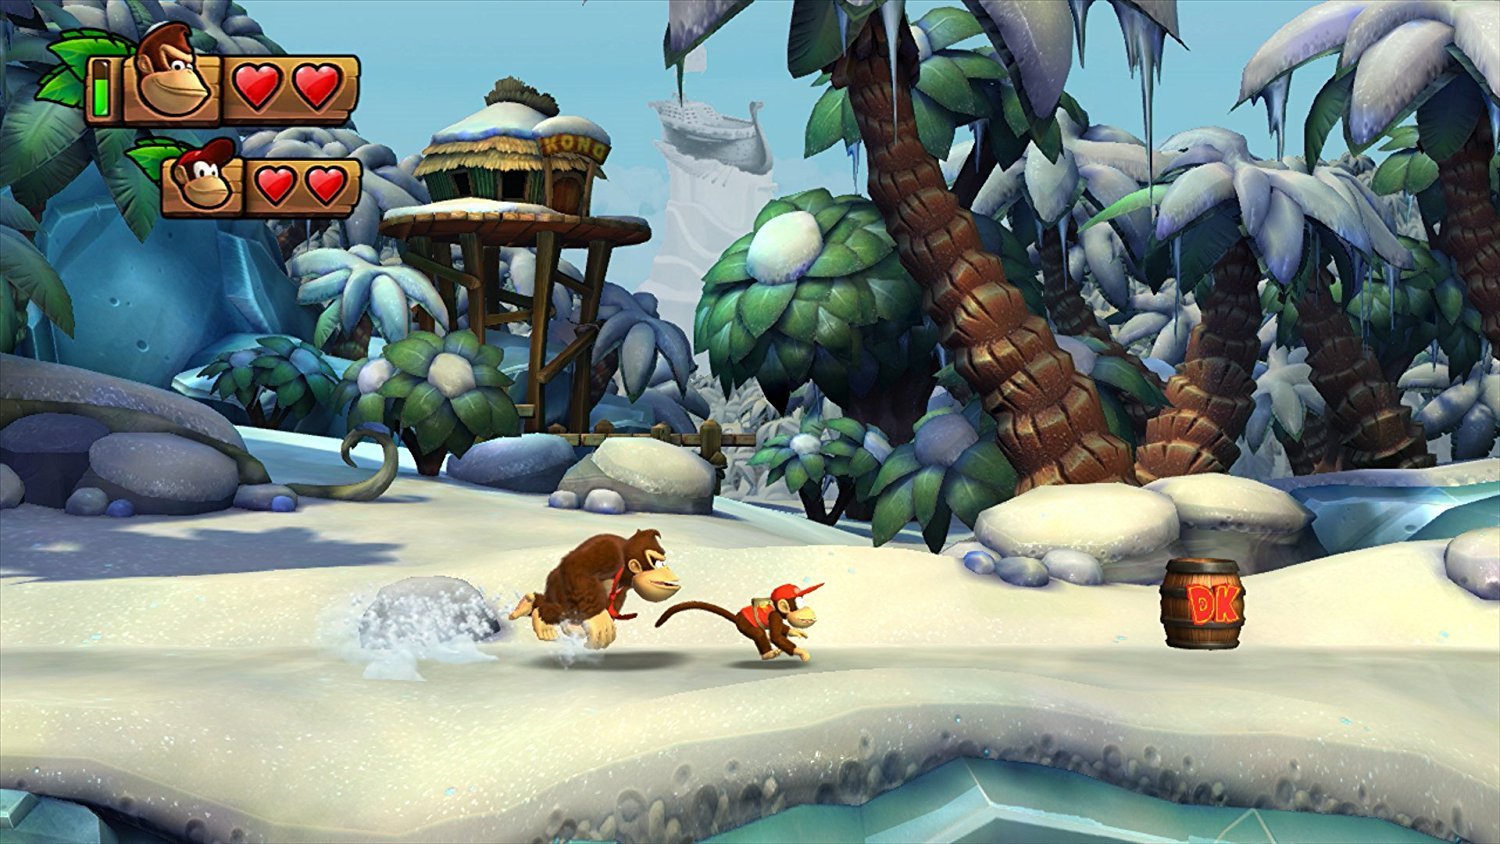 wii donkey kong country tropical freeze